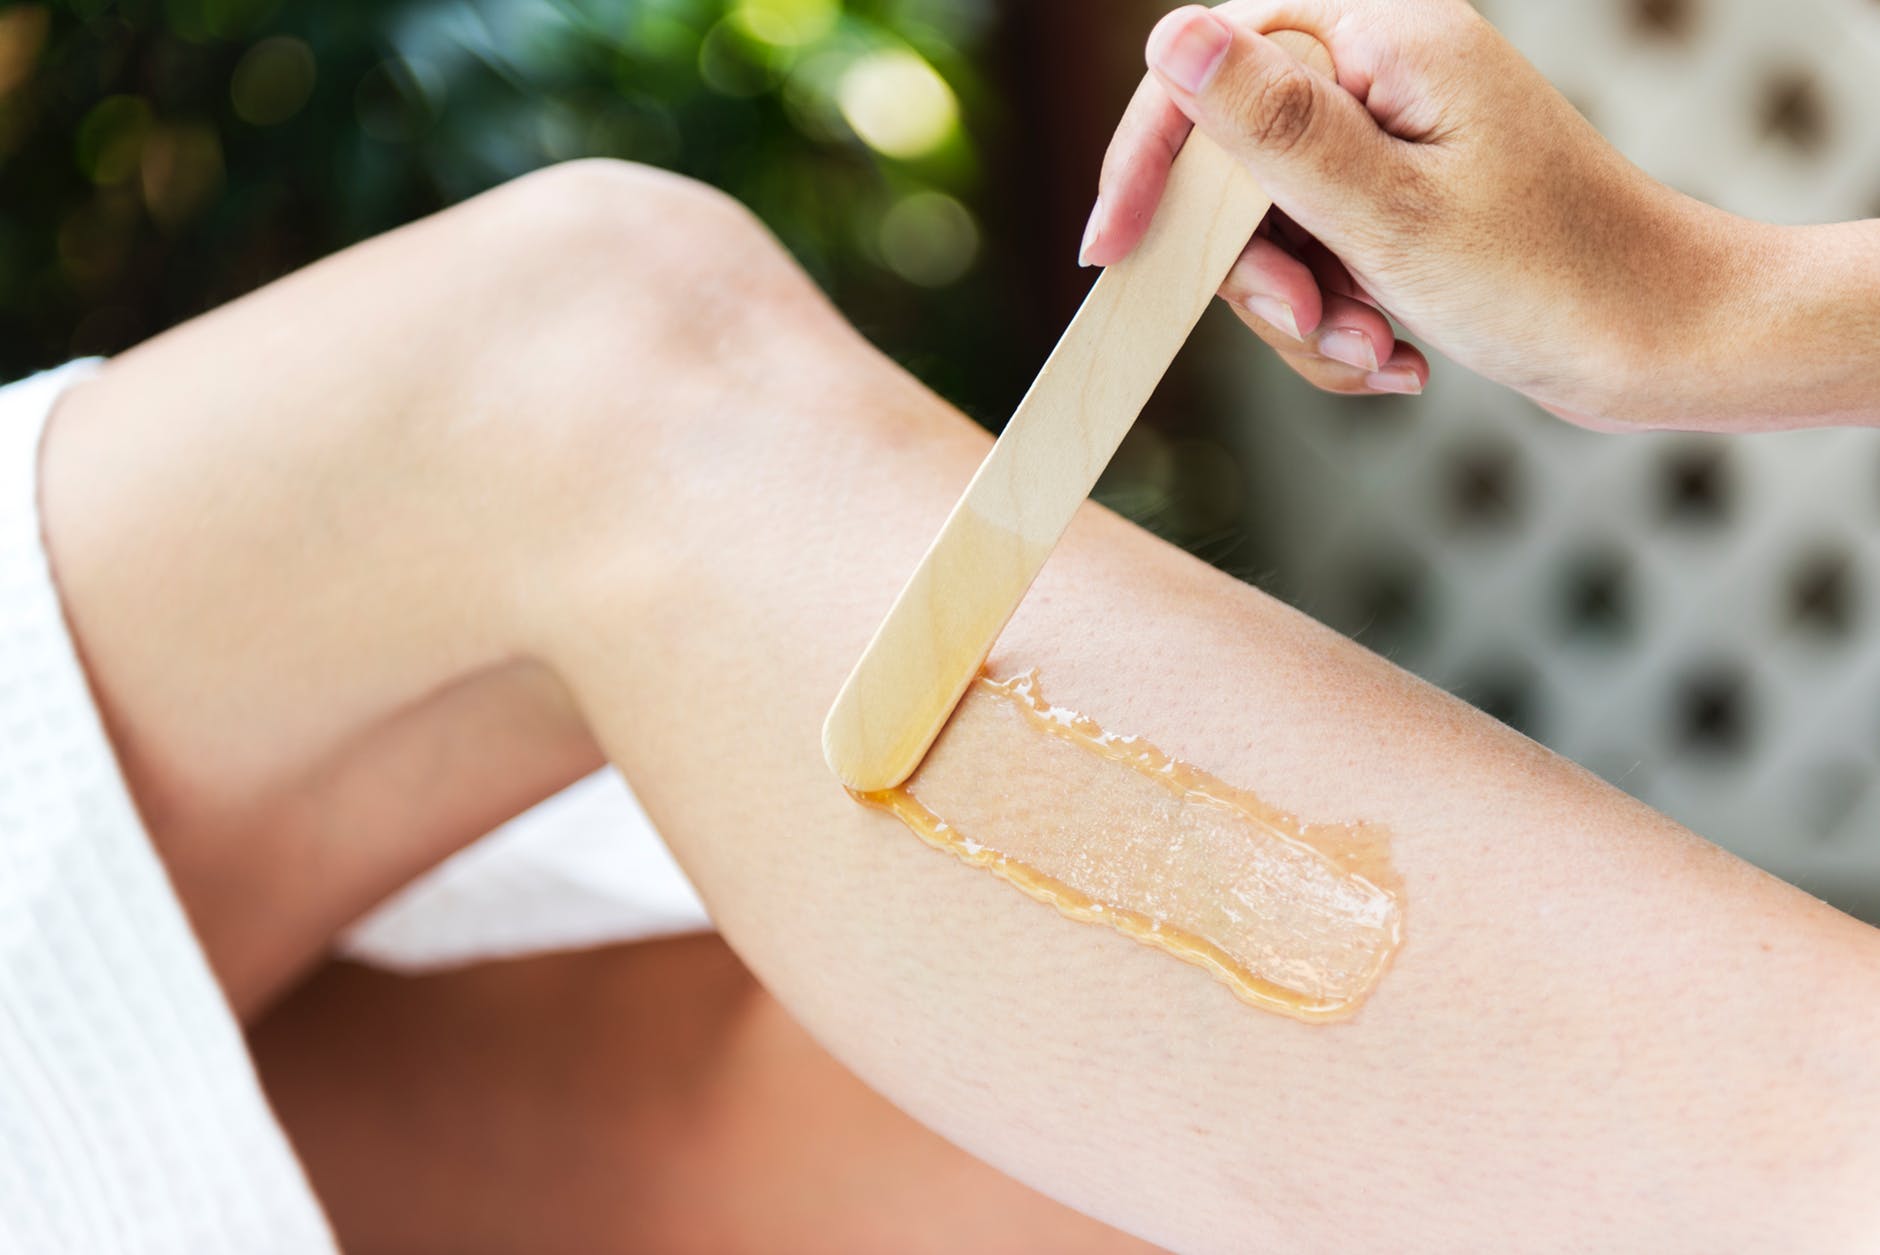 How to care for your skin after waxing